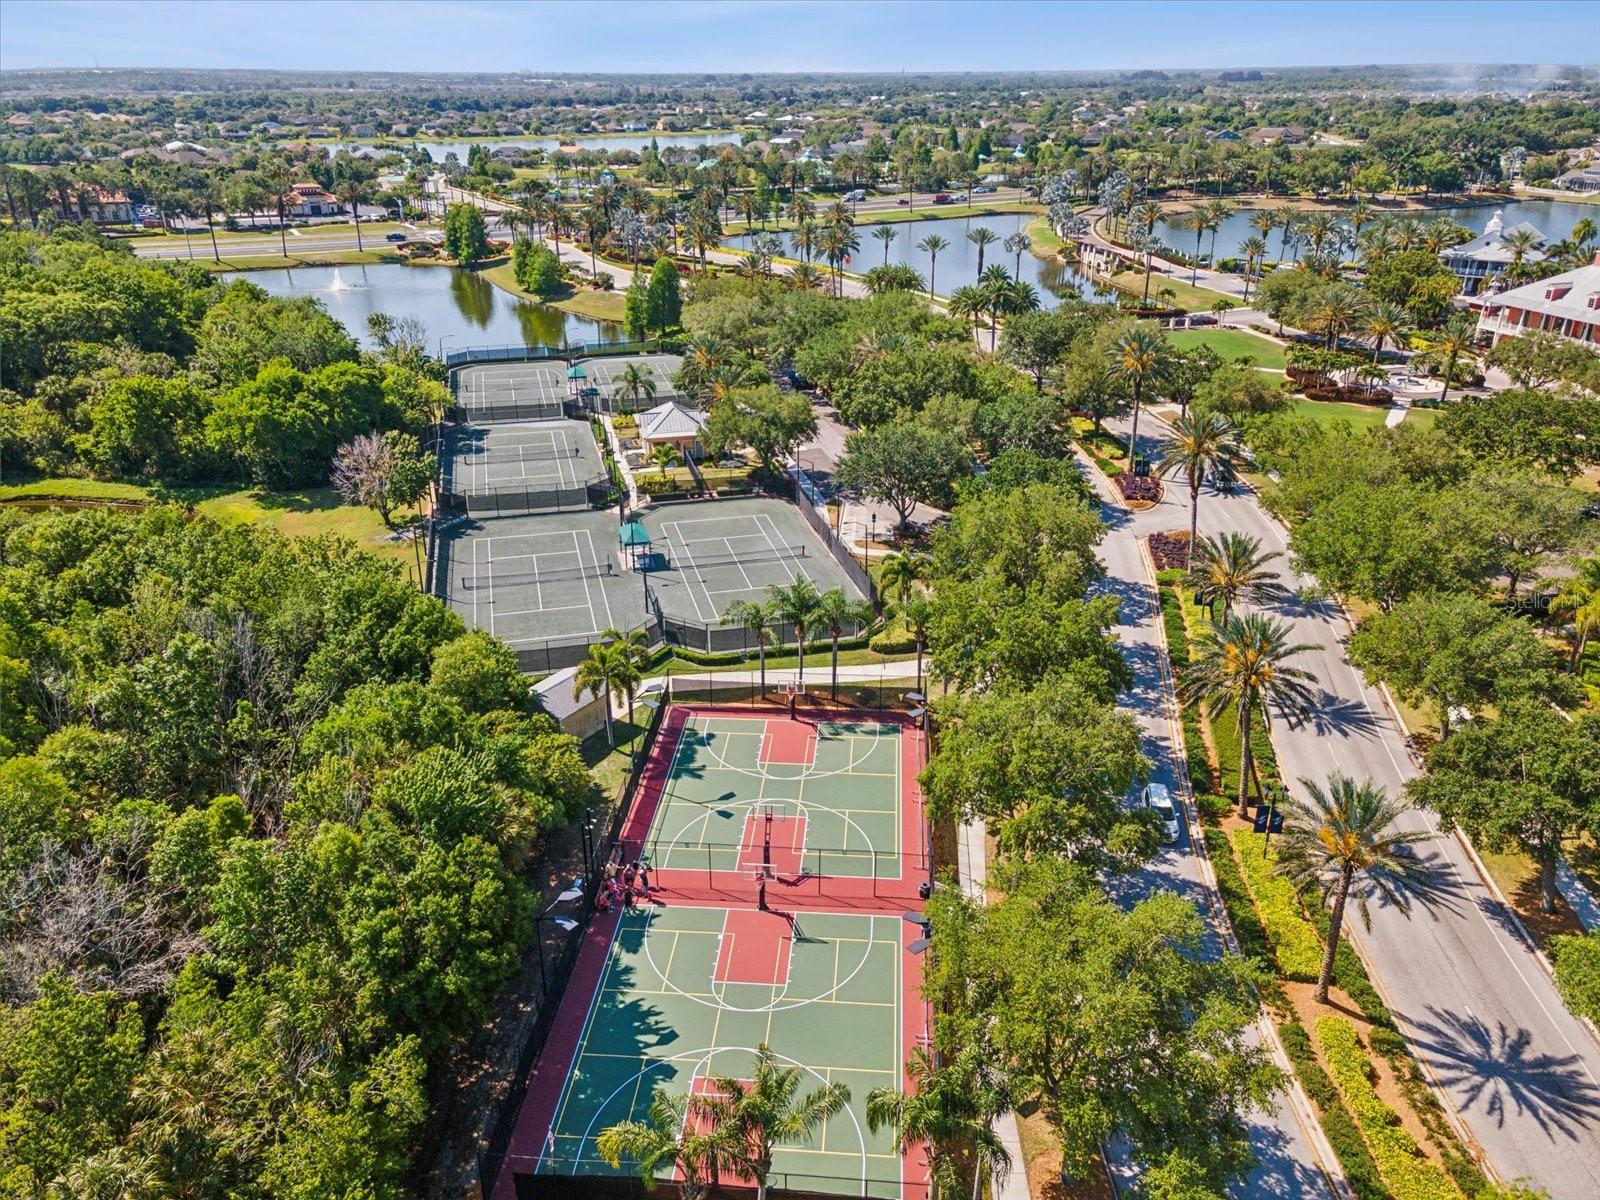 Tennis and basketball courts that are converted into pickle ball courts, are amenities offered in Mirabay.